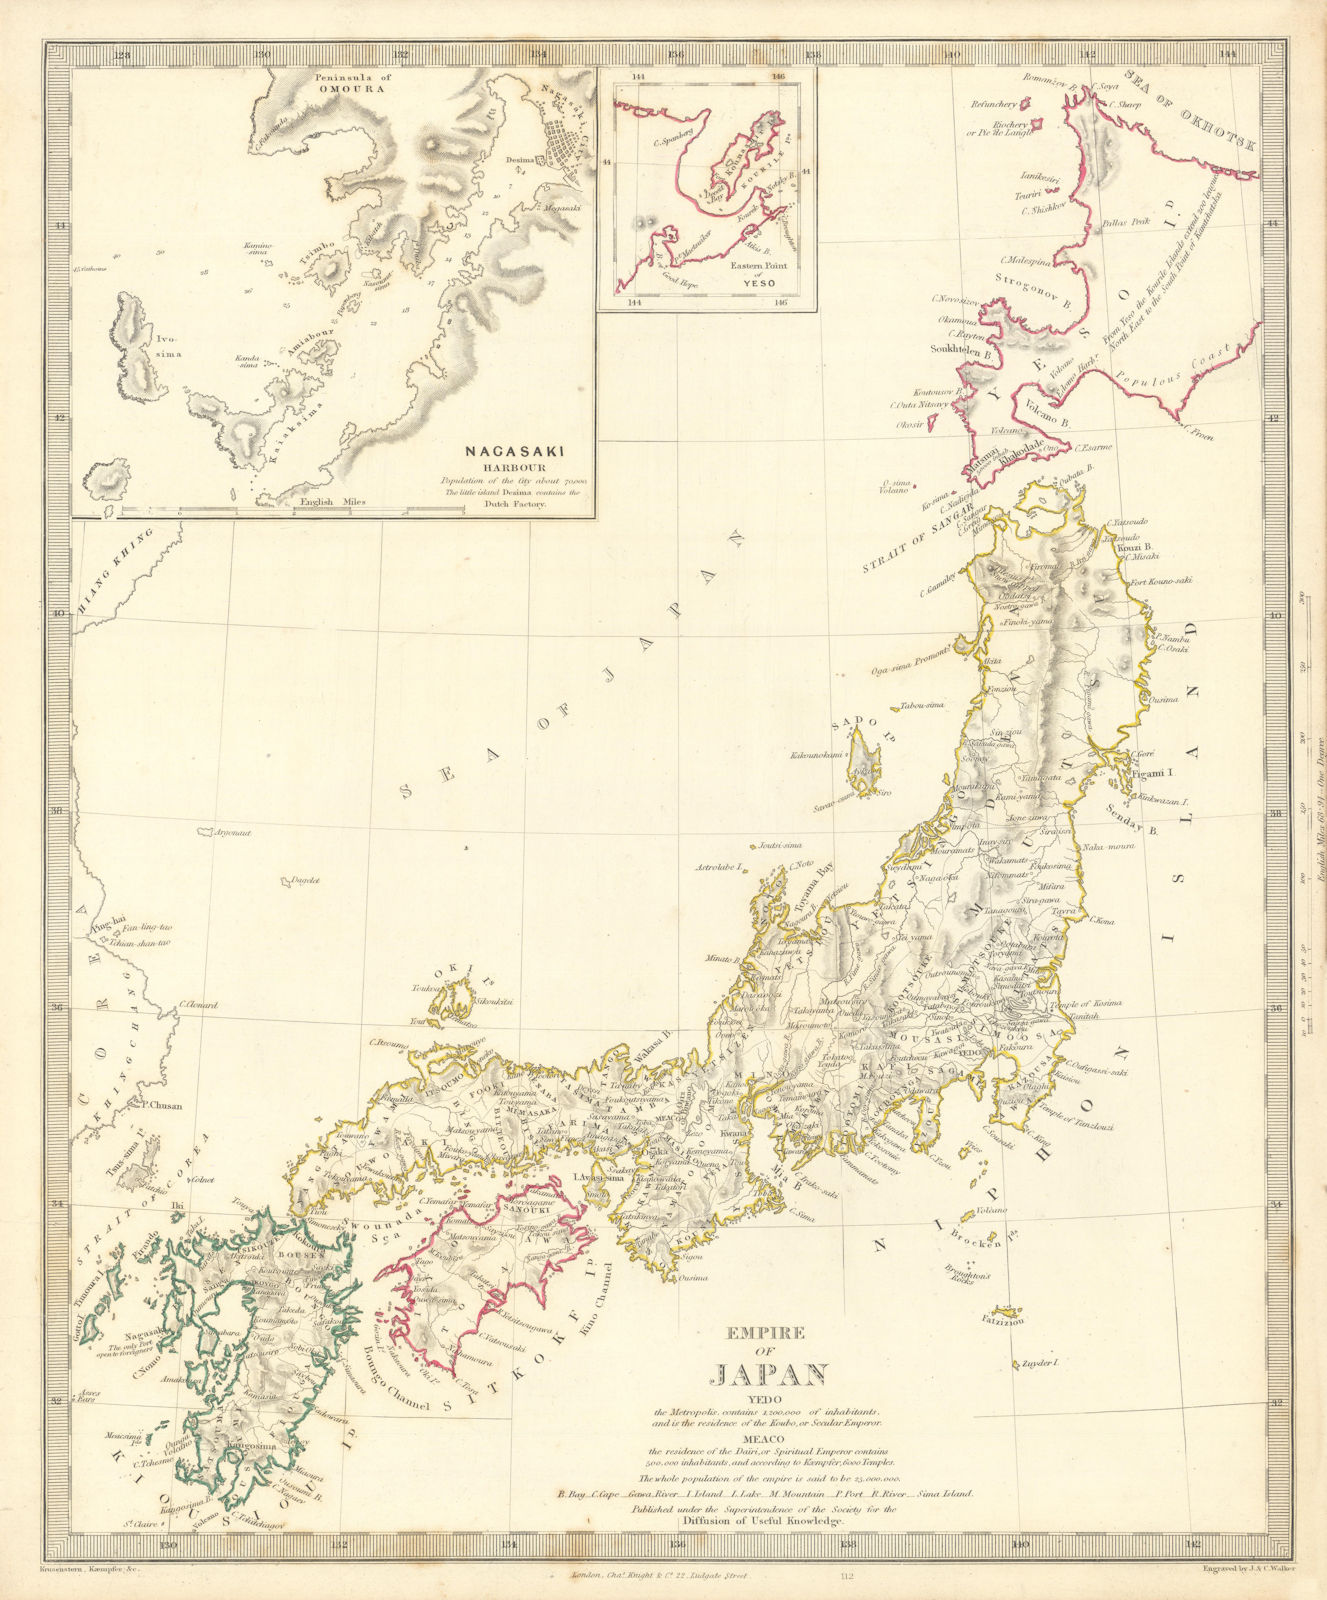 Associate Product EMPIRE OF JAPAN  Nagasaki Harbour Yeso Niphon Nippon SDUK 1844 old antique map